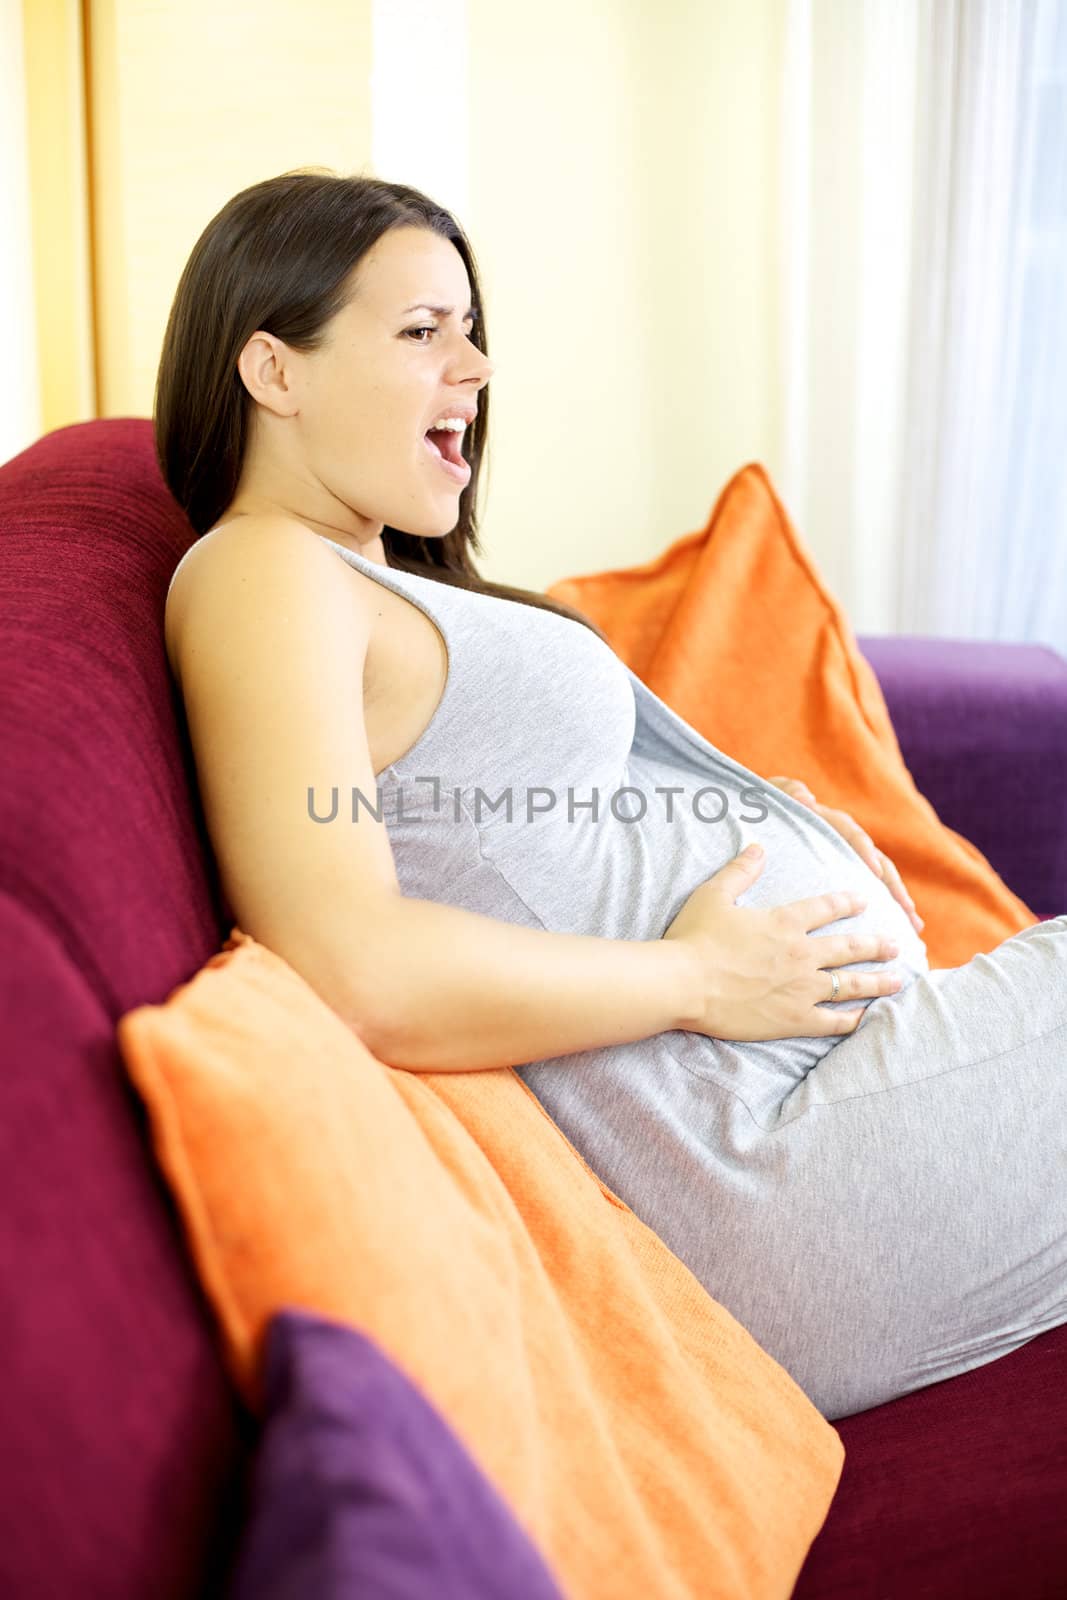 Pregnant woman suffering ready to deliver by fmarsicano